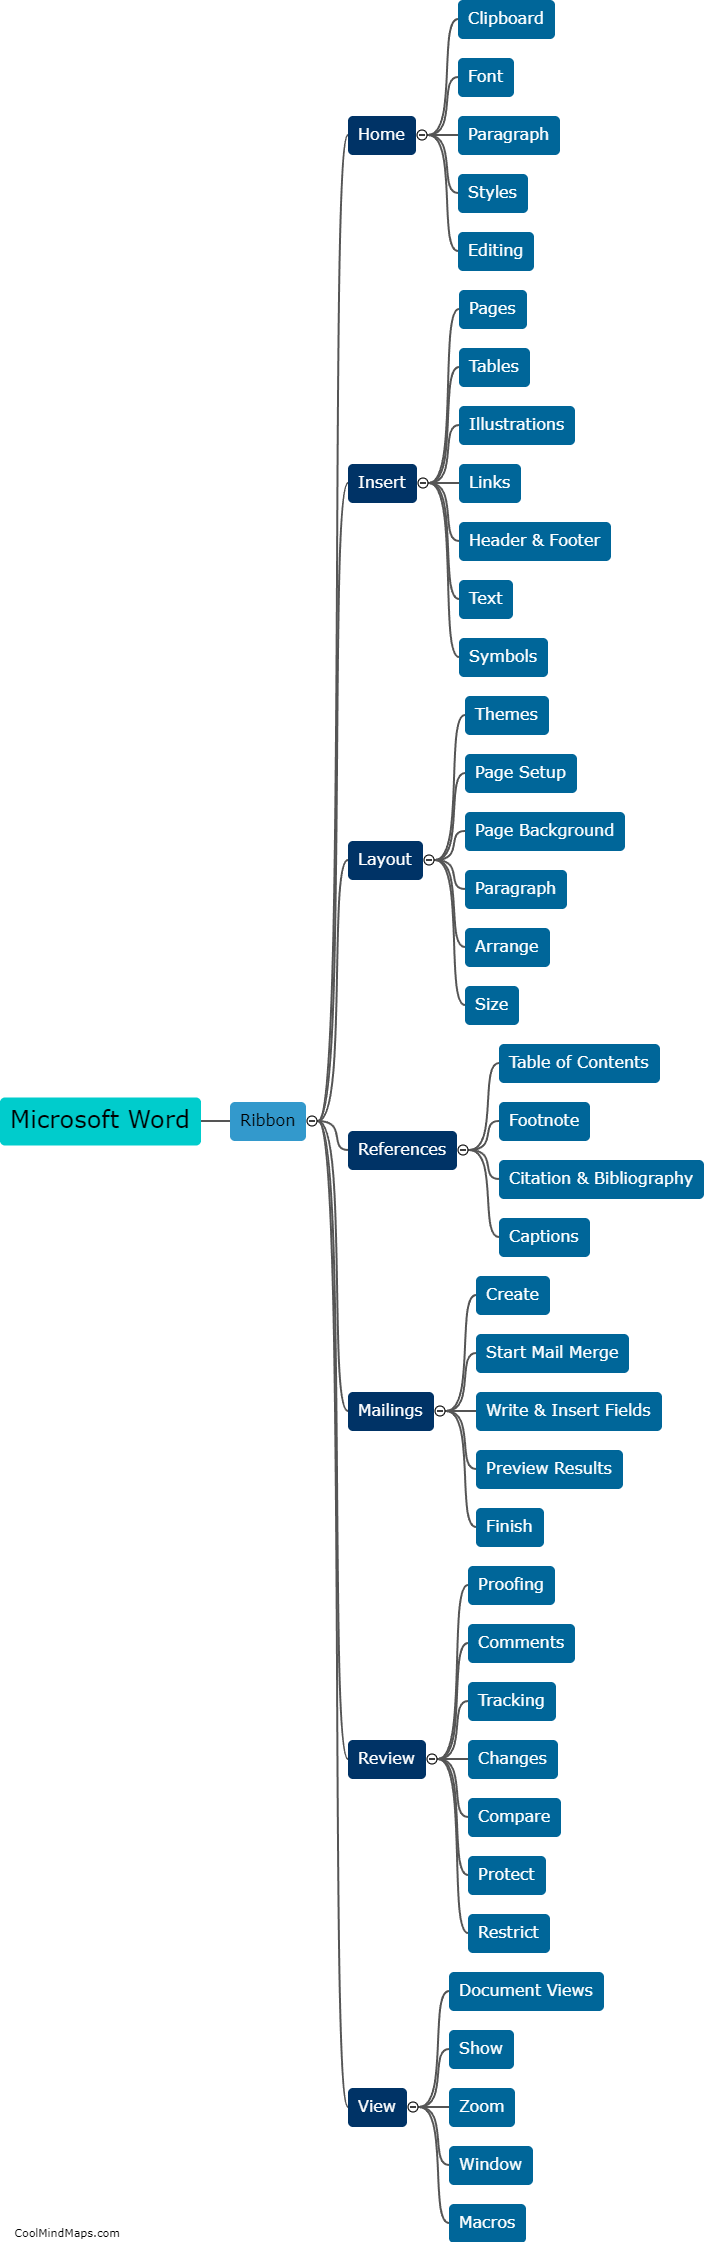 How do you navigate through the different parts of Microsoft Word?